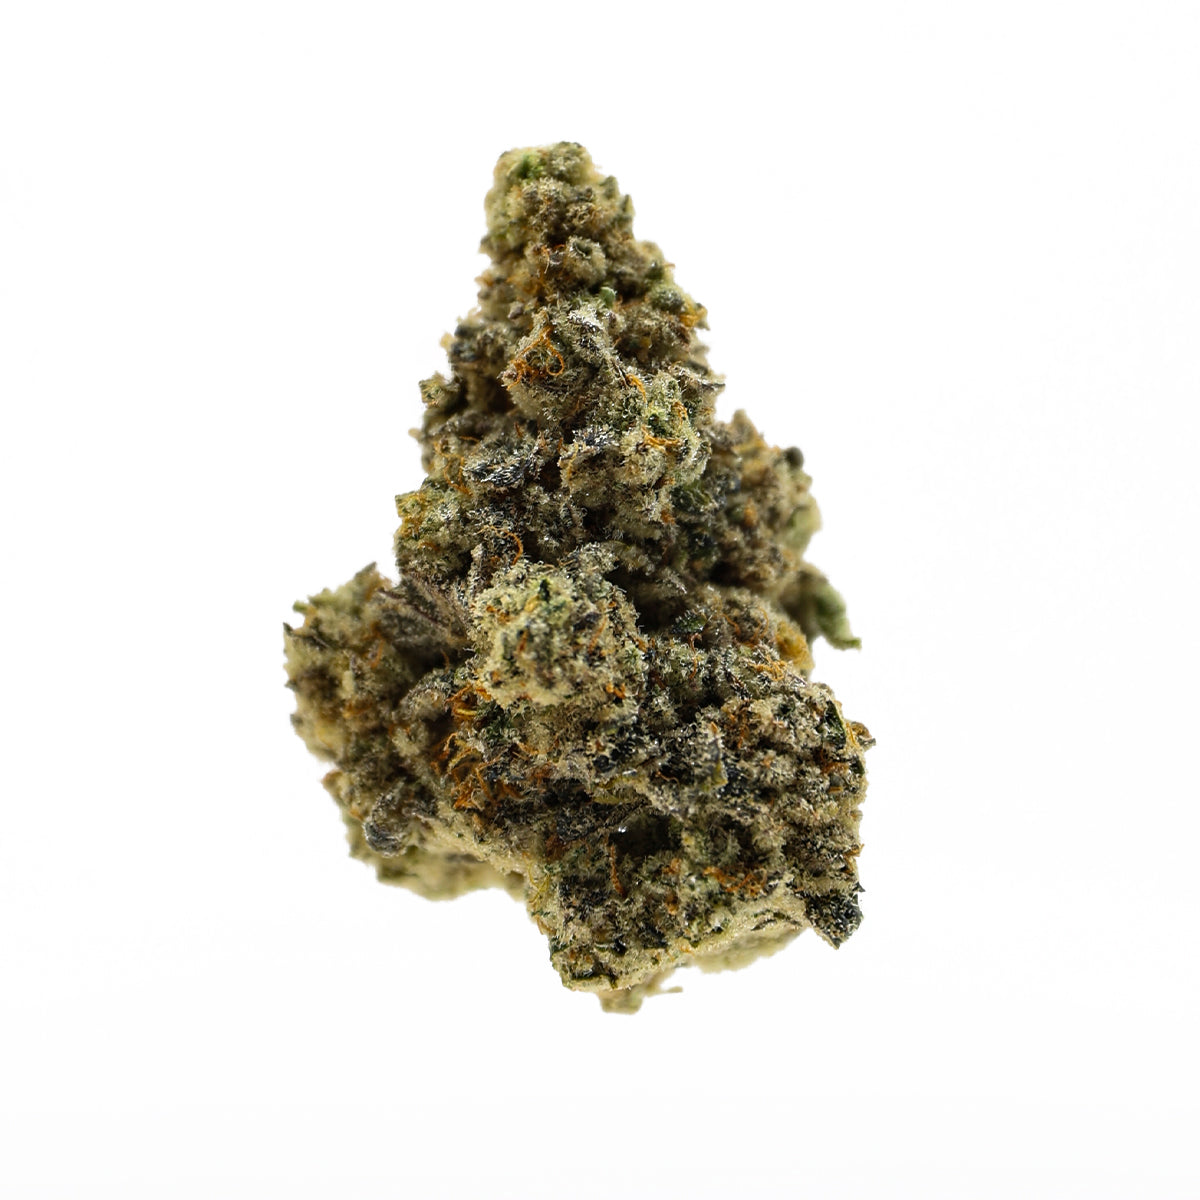 Cap Junkie Premium THCa Hybrid Hemp Flower - This high potency hybrid is so frosty, completely covered in trichomes. Cap Junkie has a fruity, creamy nose and provides a smooth relaxing experience. Highly recommend! Available in 3.5g and 14g size jars.